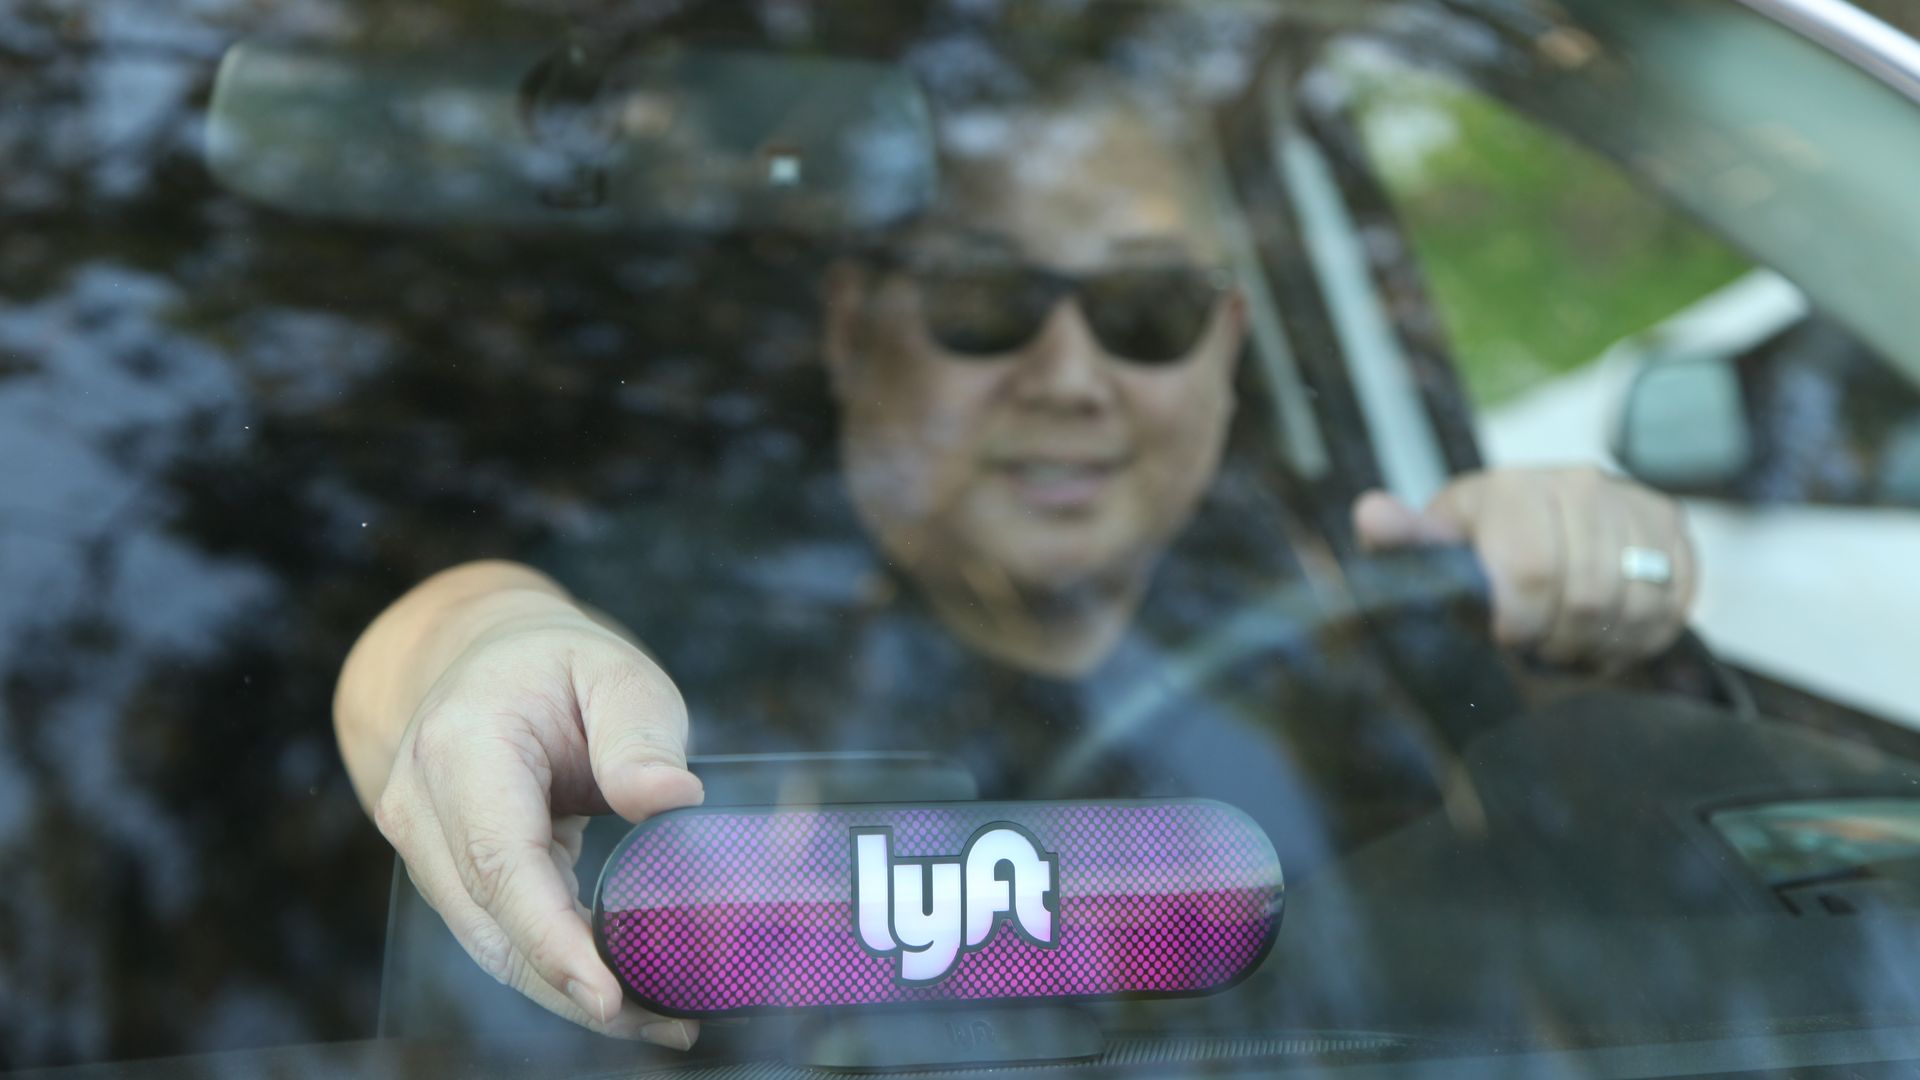 Driver behind the wheel with an illuminated Lyft sign on dashboard